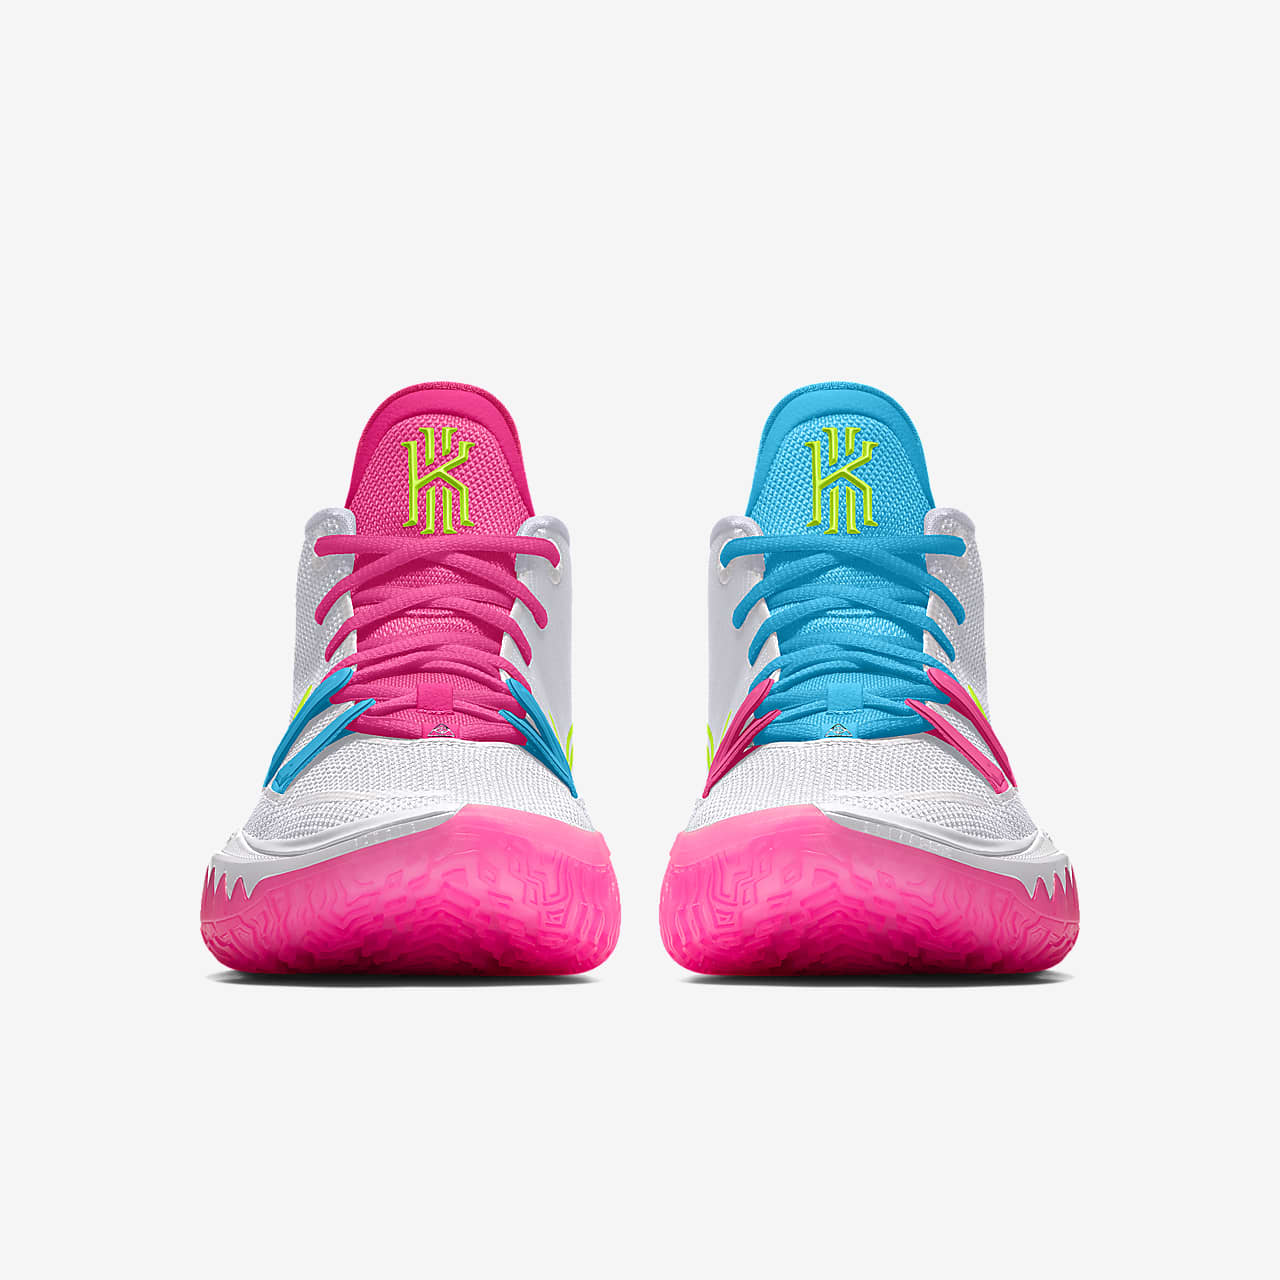 kyrie pink shoes